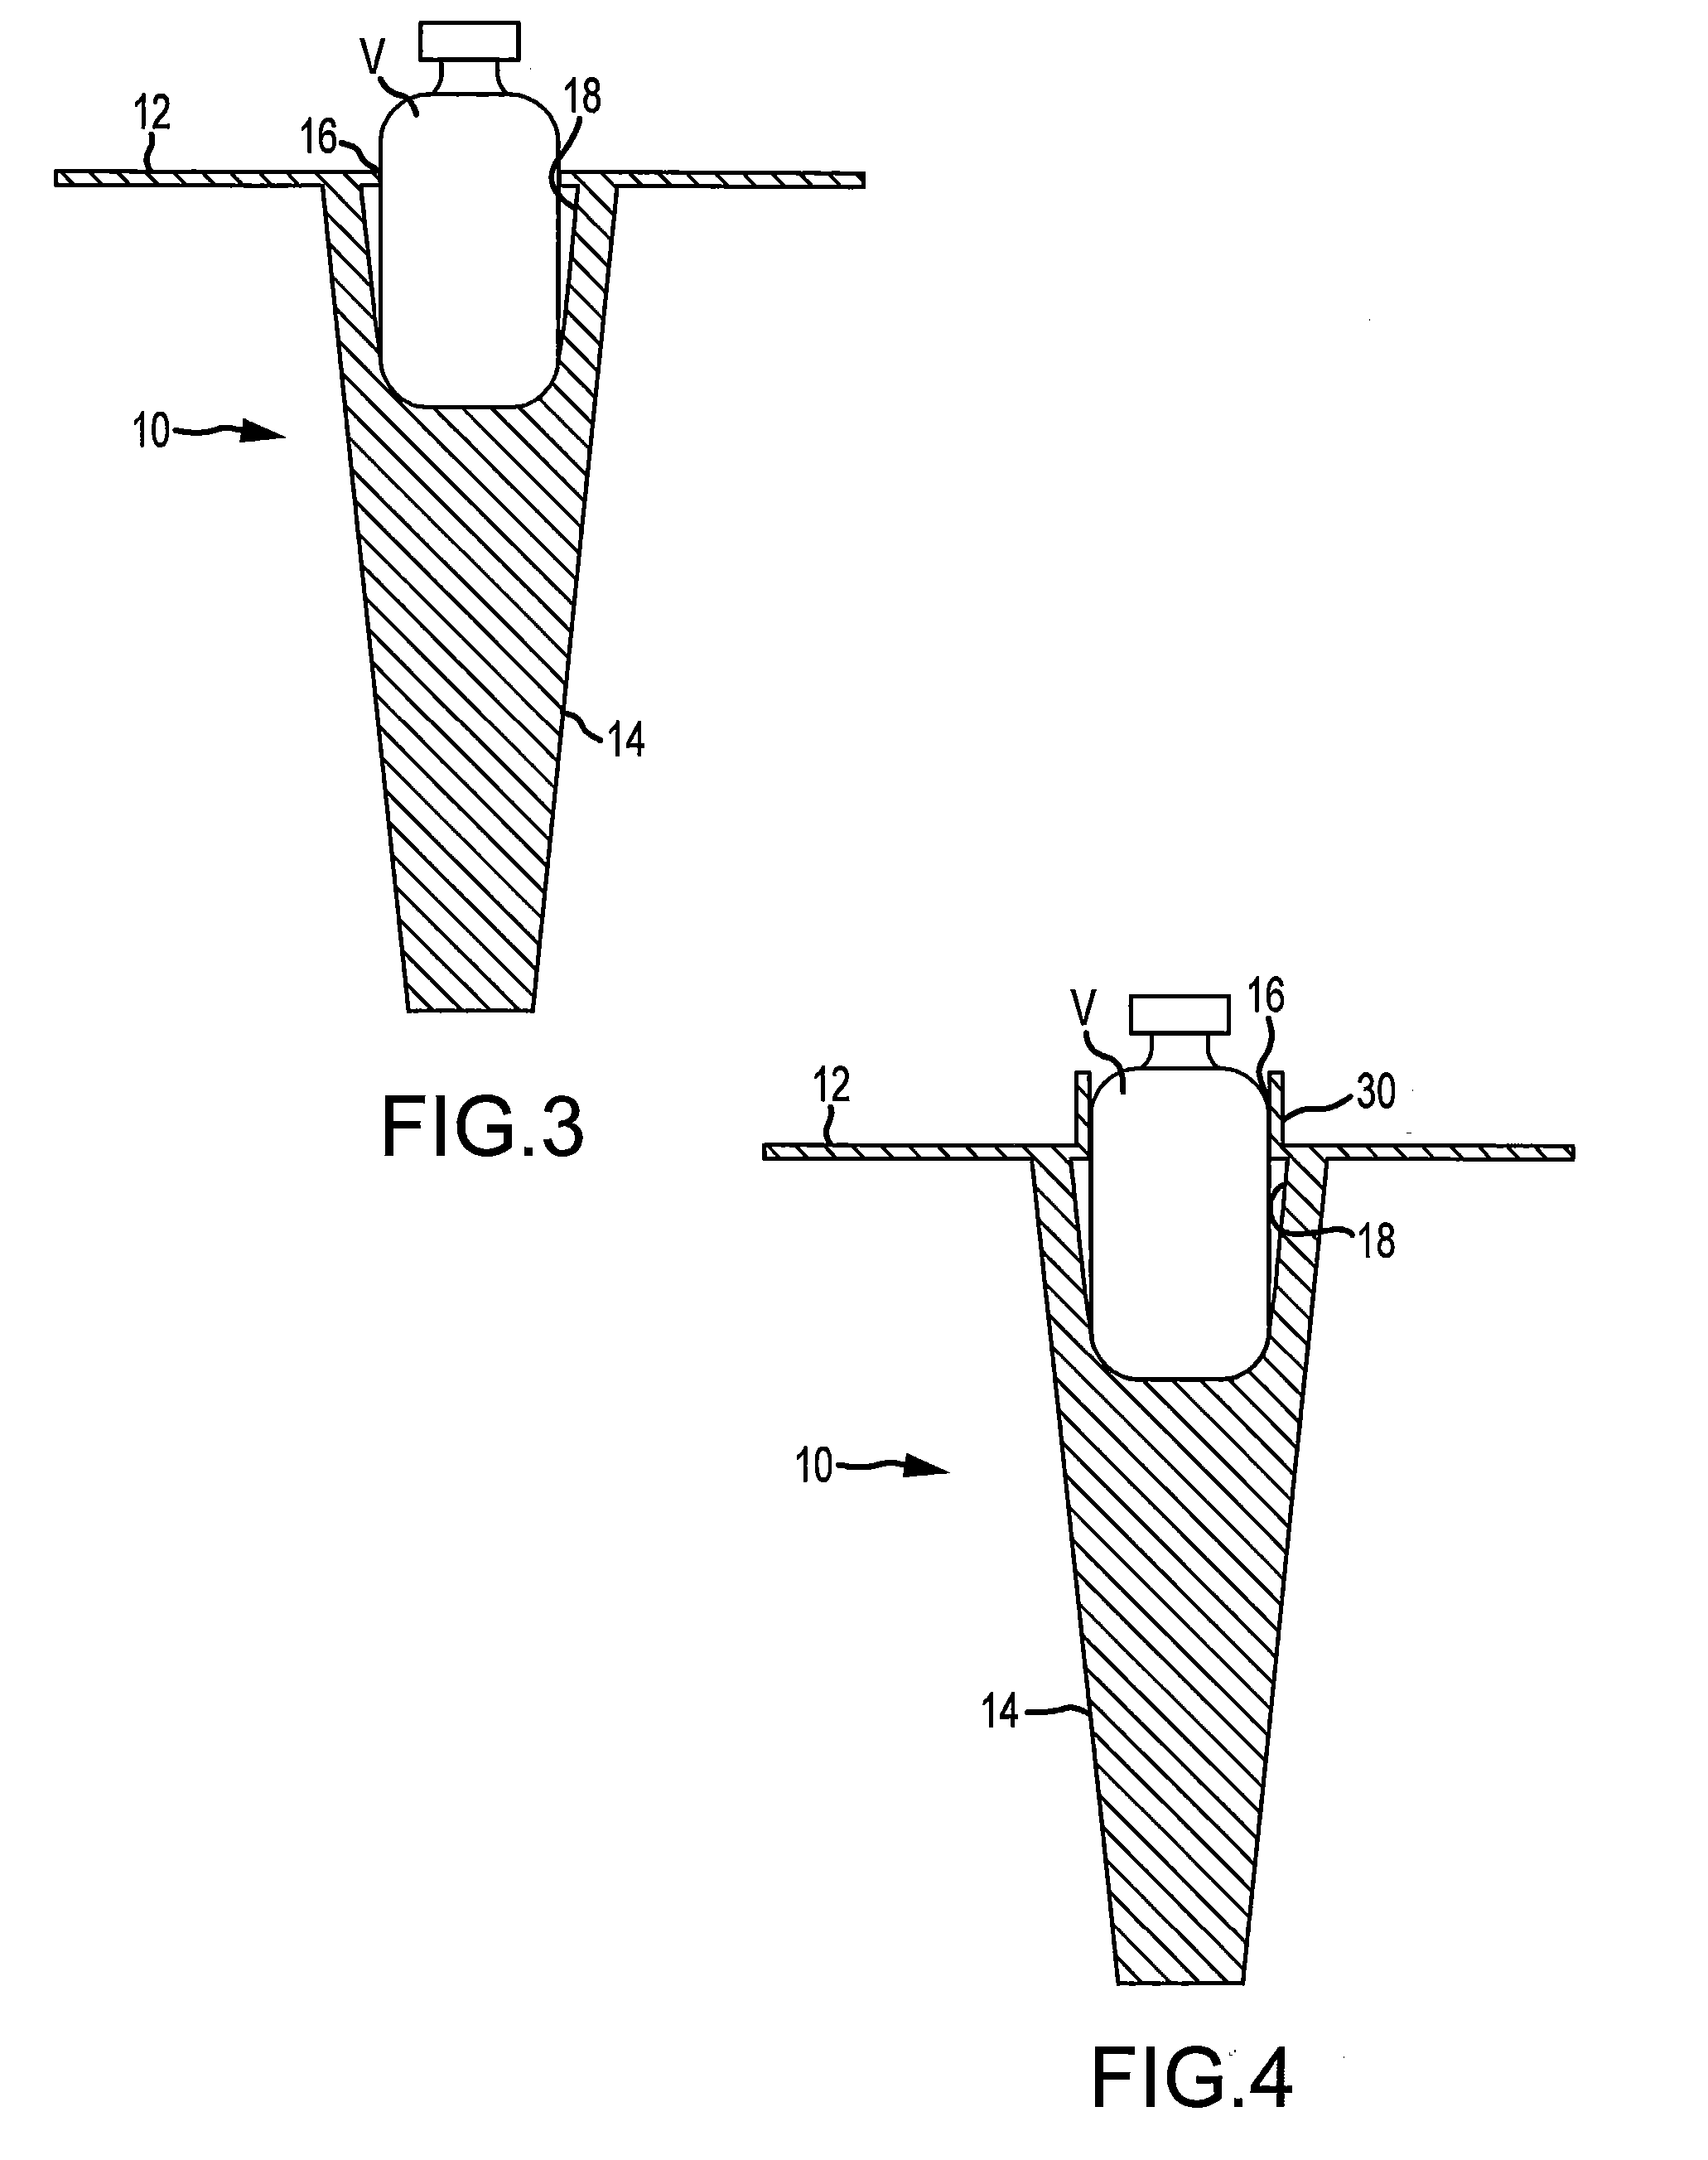 Disposable vial holder and method to prevent needle stick injuries